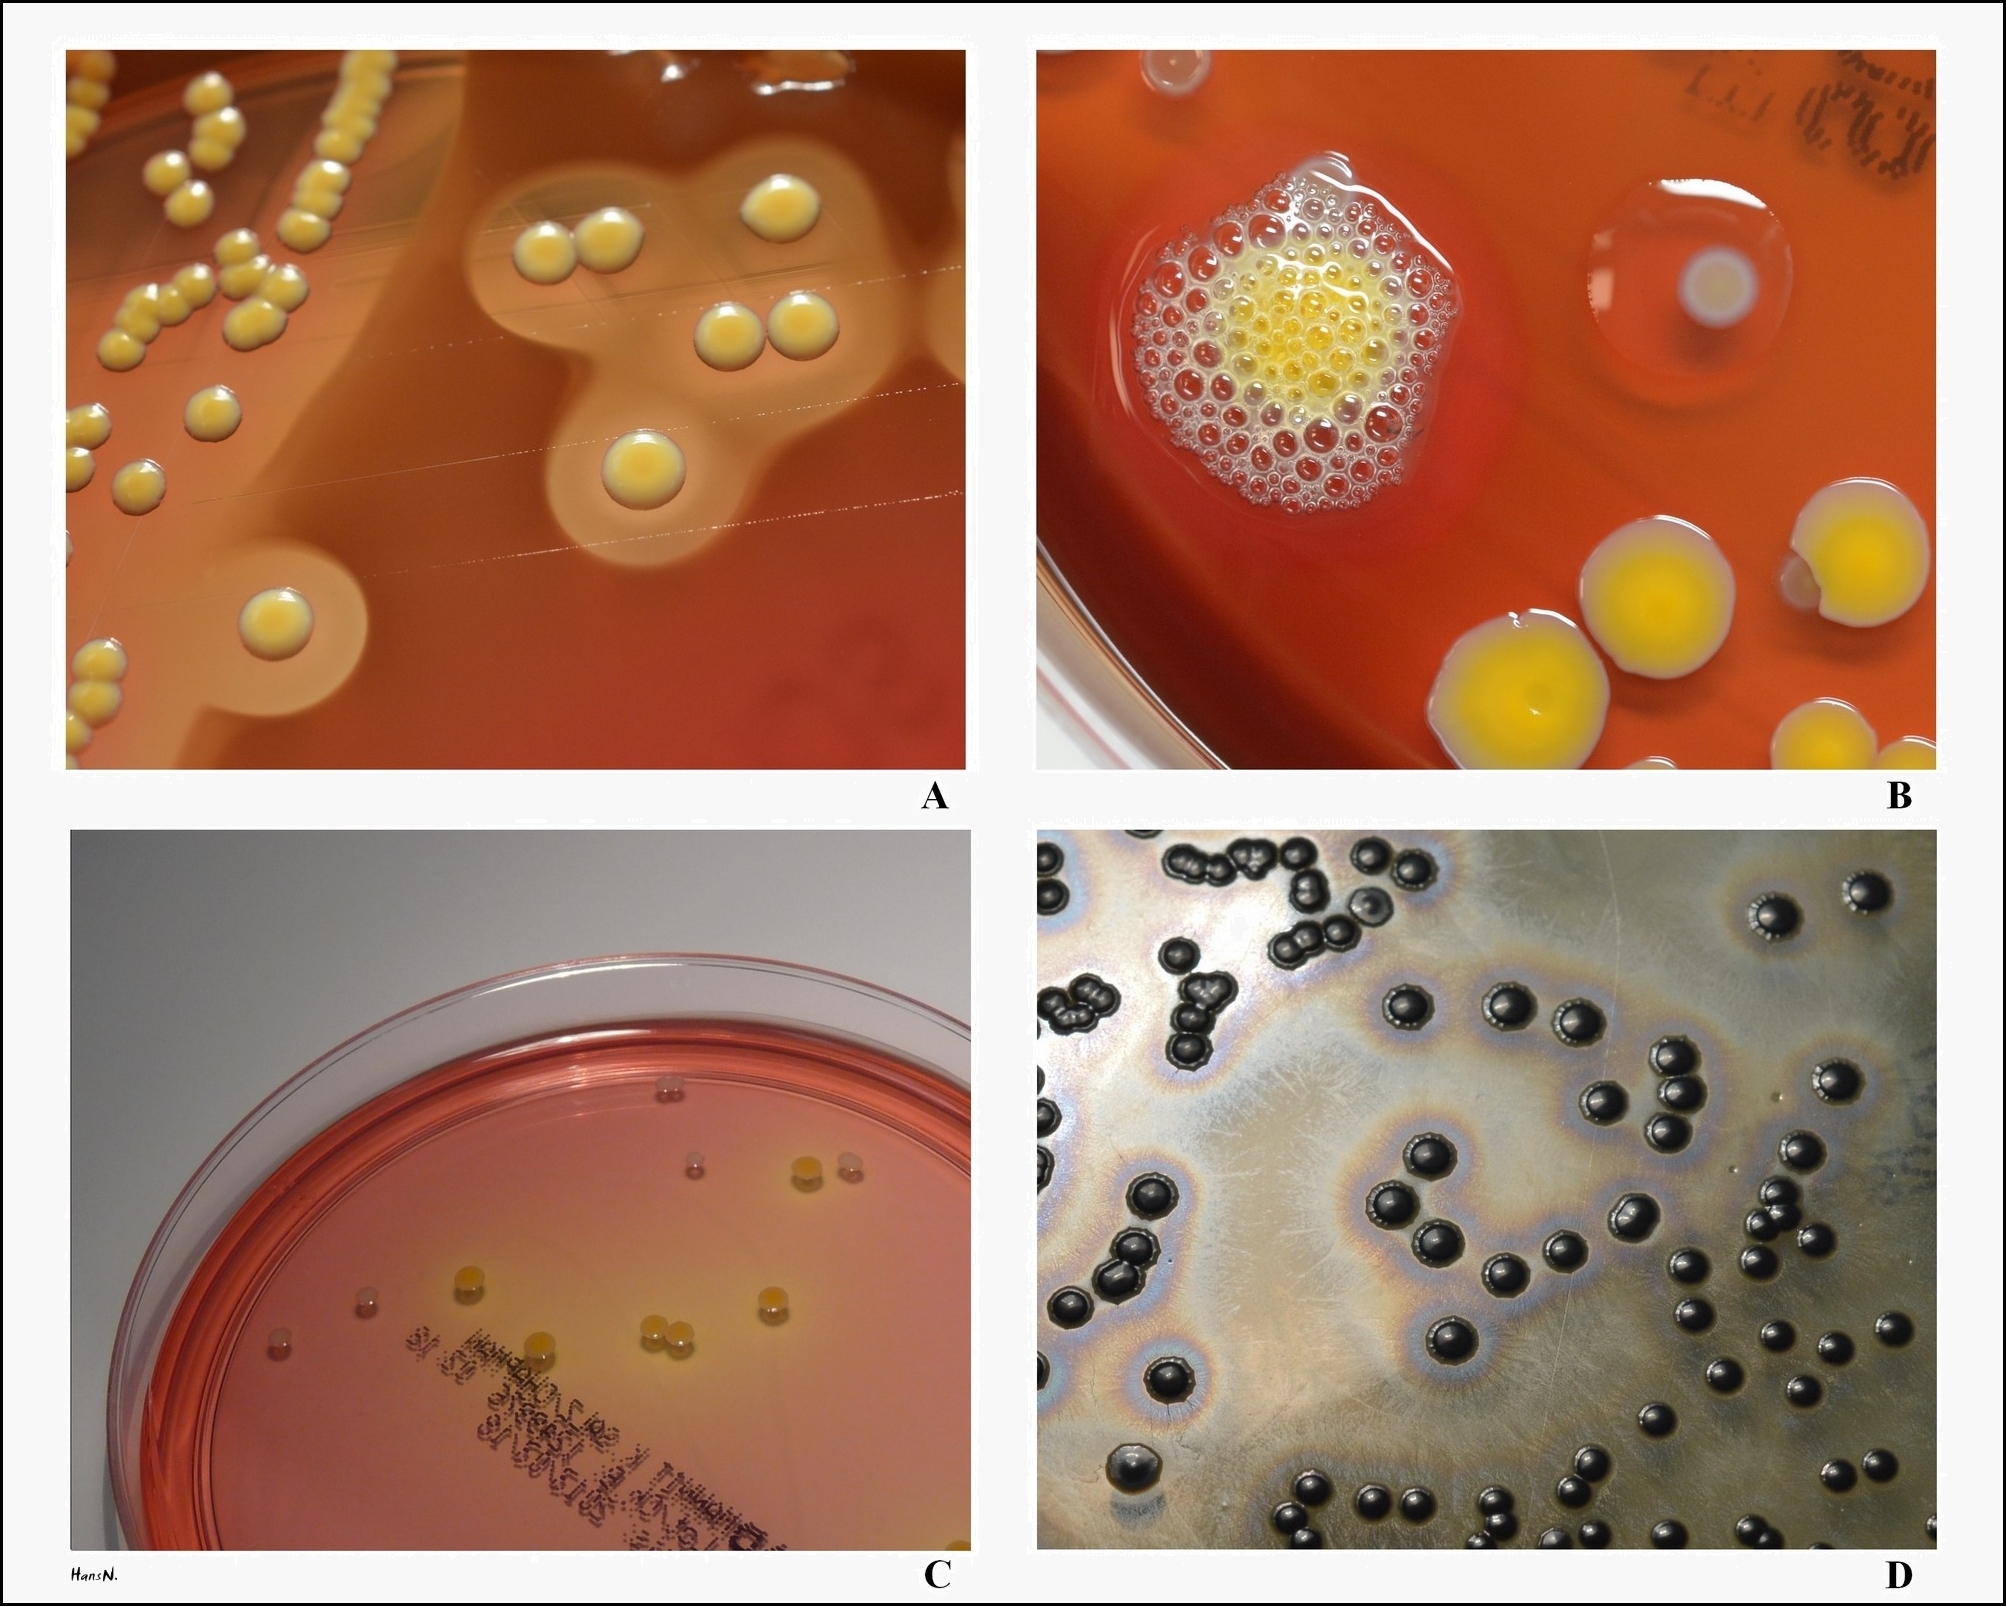 s. aureus growth under anaerobic conditions, catalase test, growth on selective media